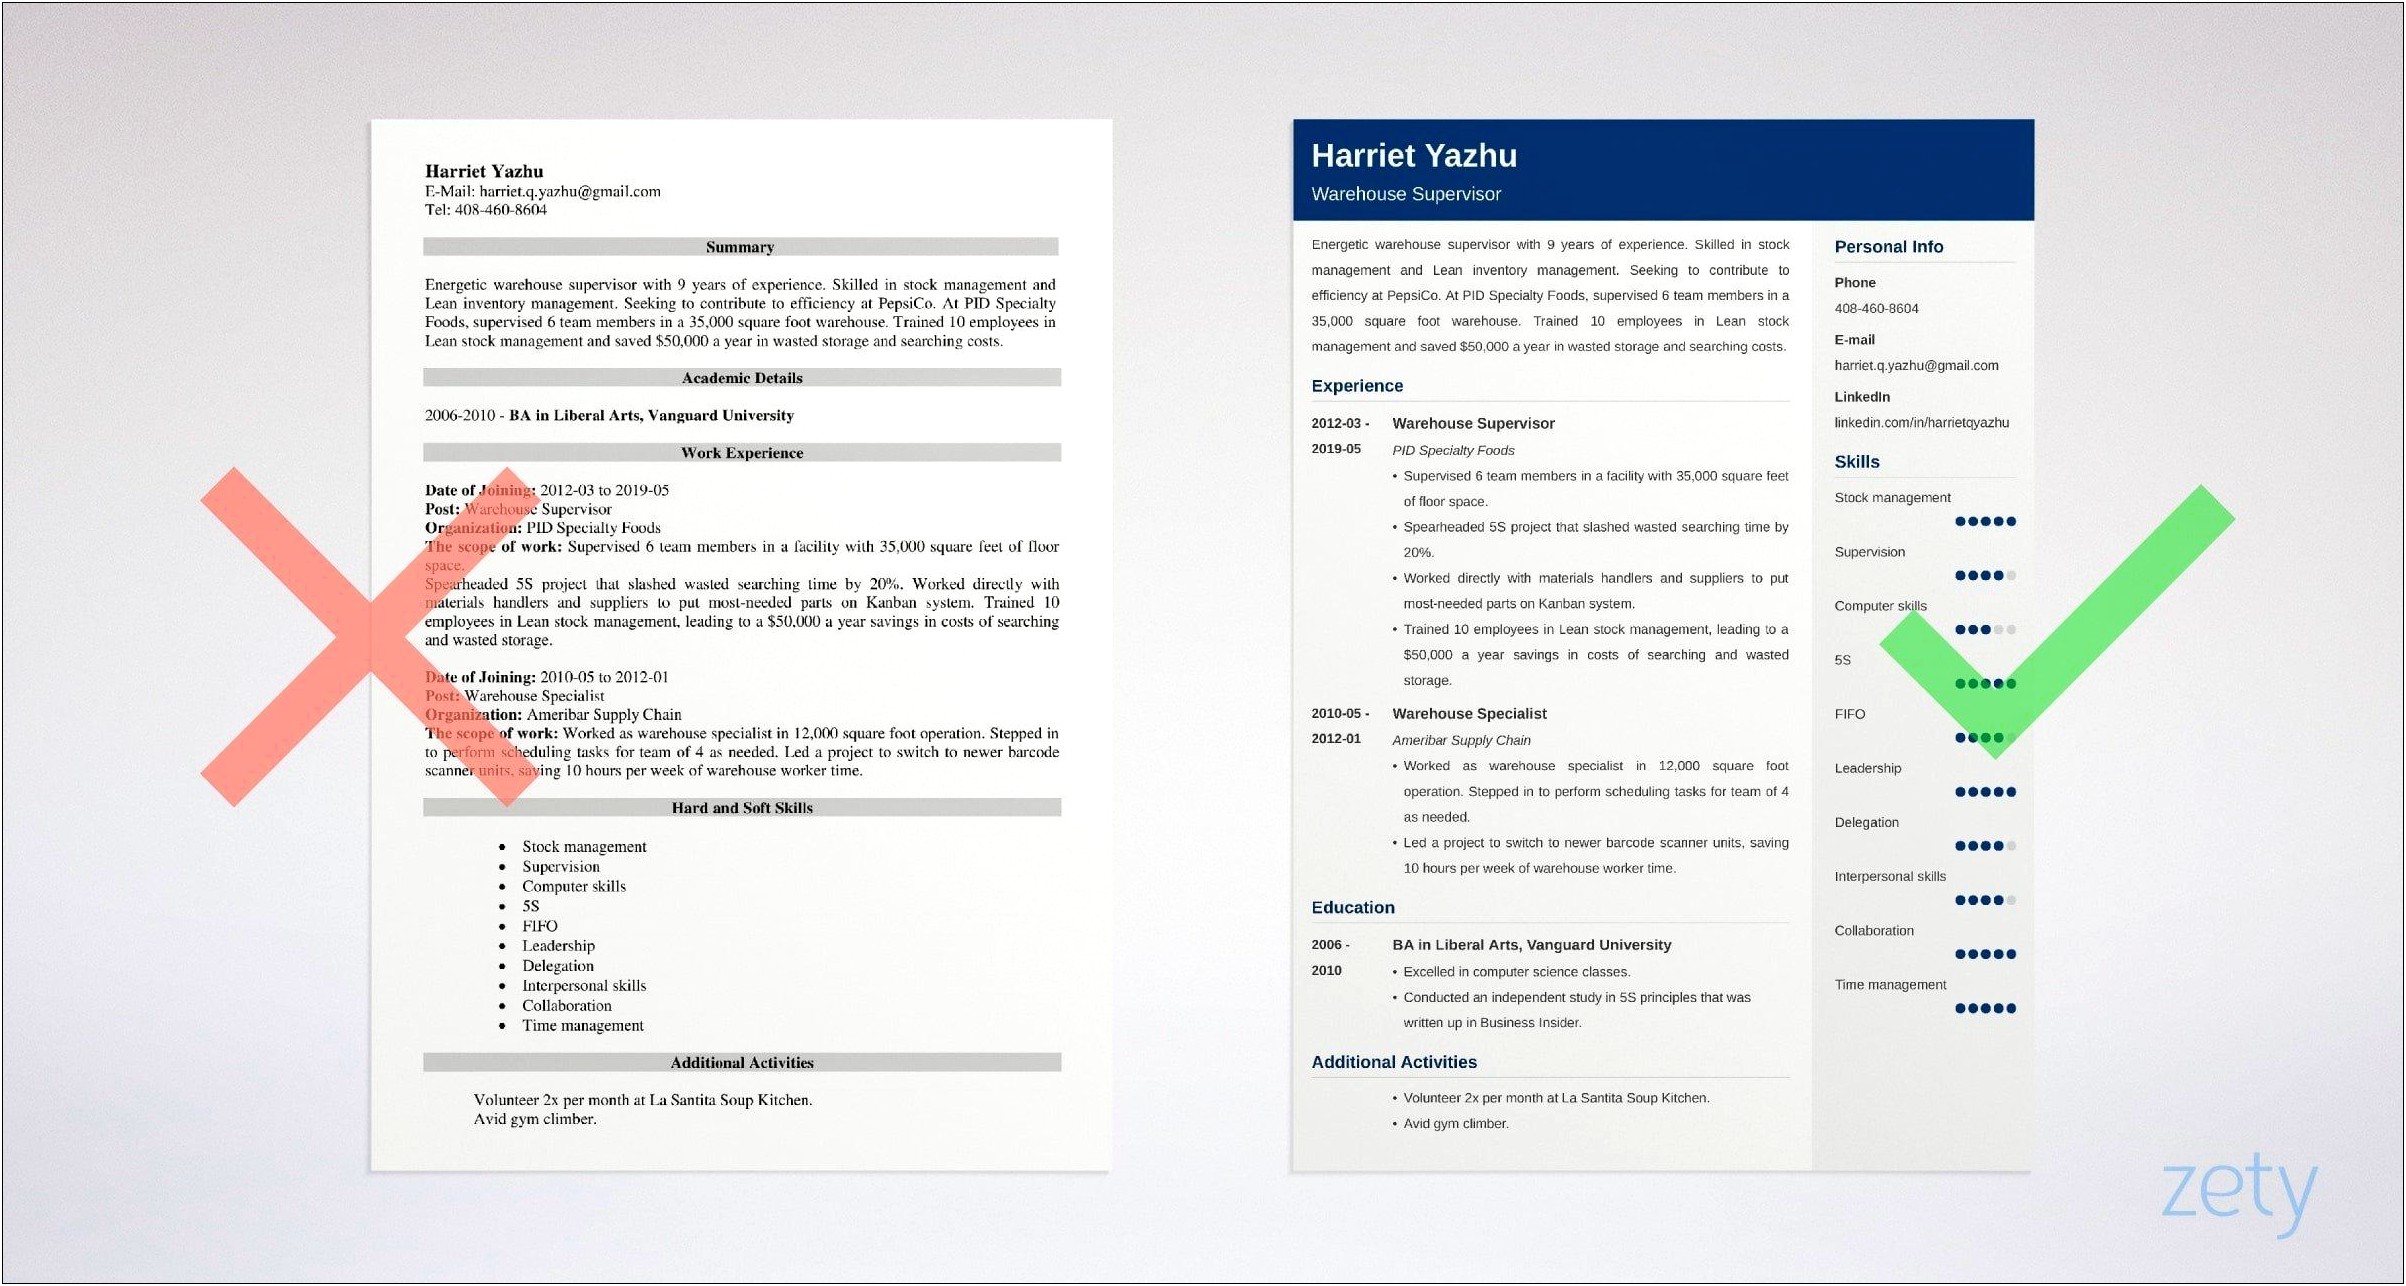 Resume Objective Sample For Warehouse